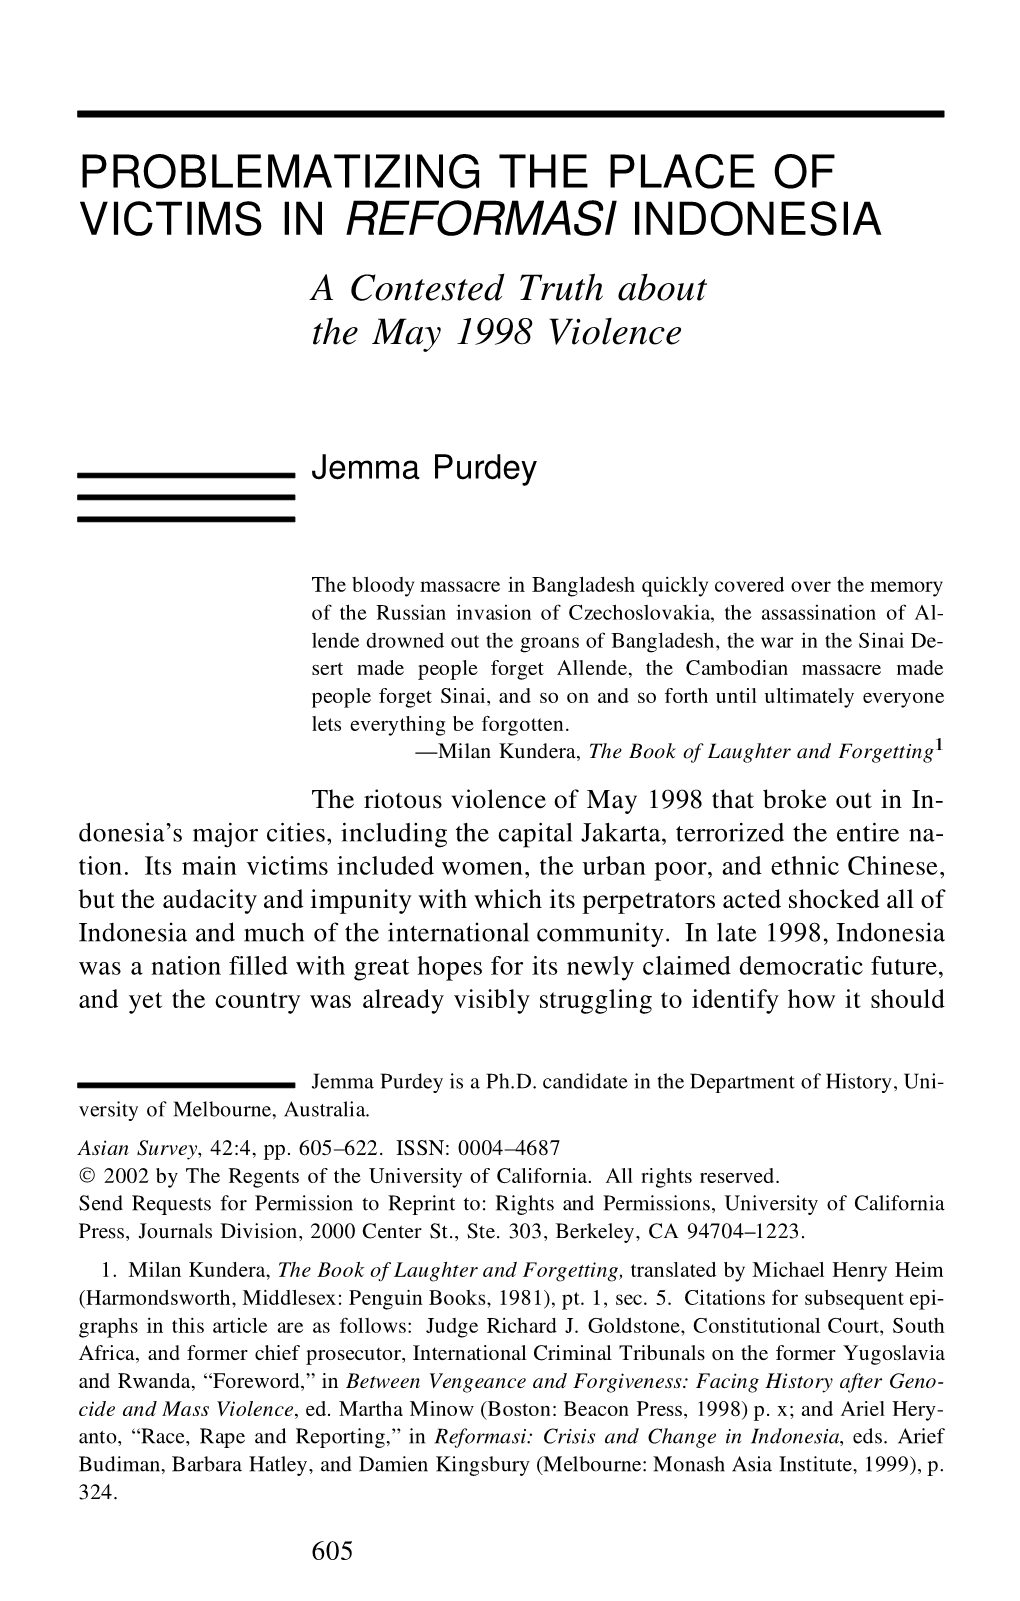 Problematizing the Place of Victims in Reformasi Indonesia: a Contested Truth About the May 1998 Violence